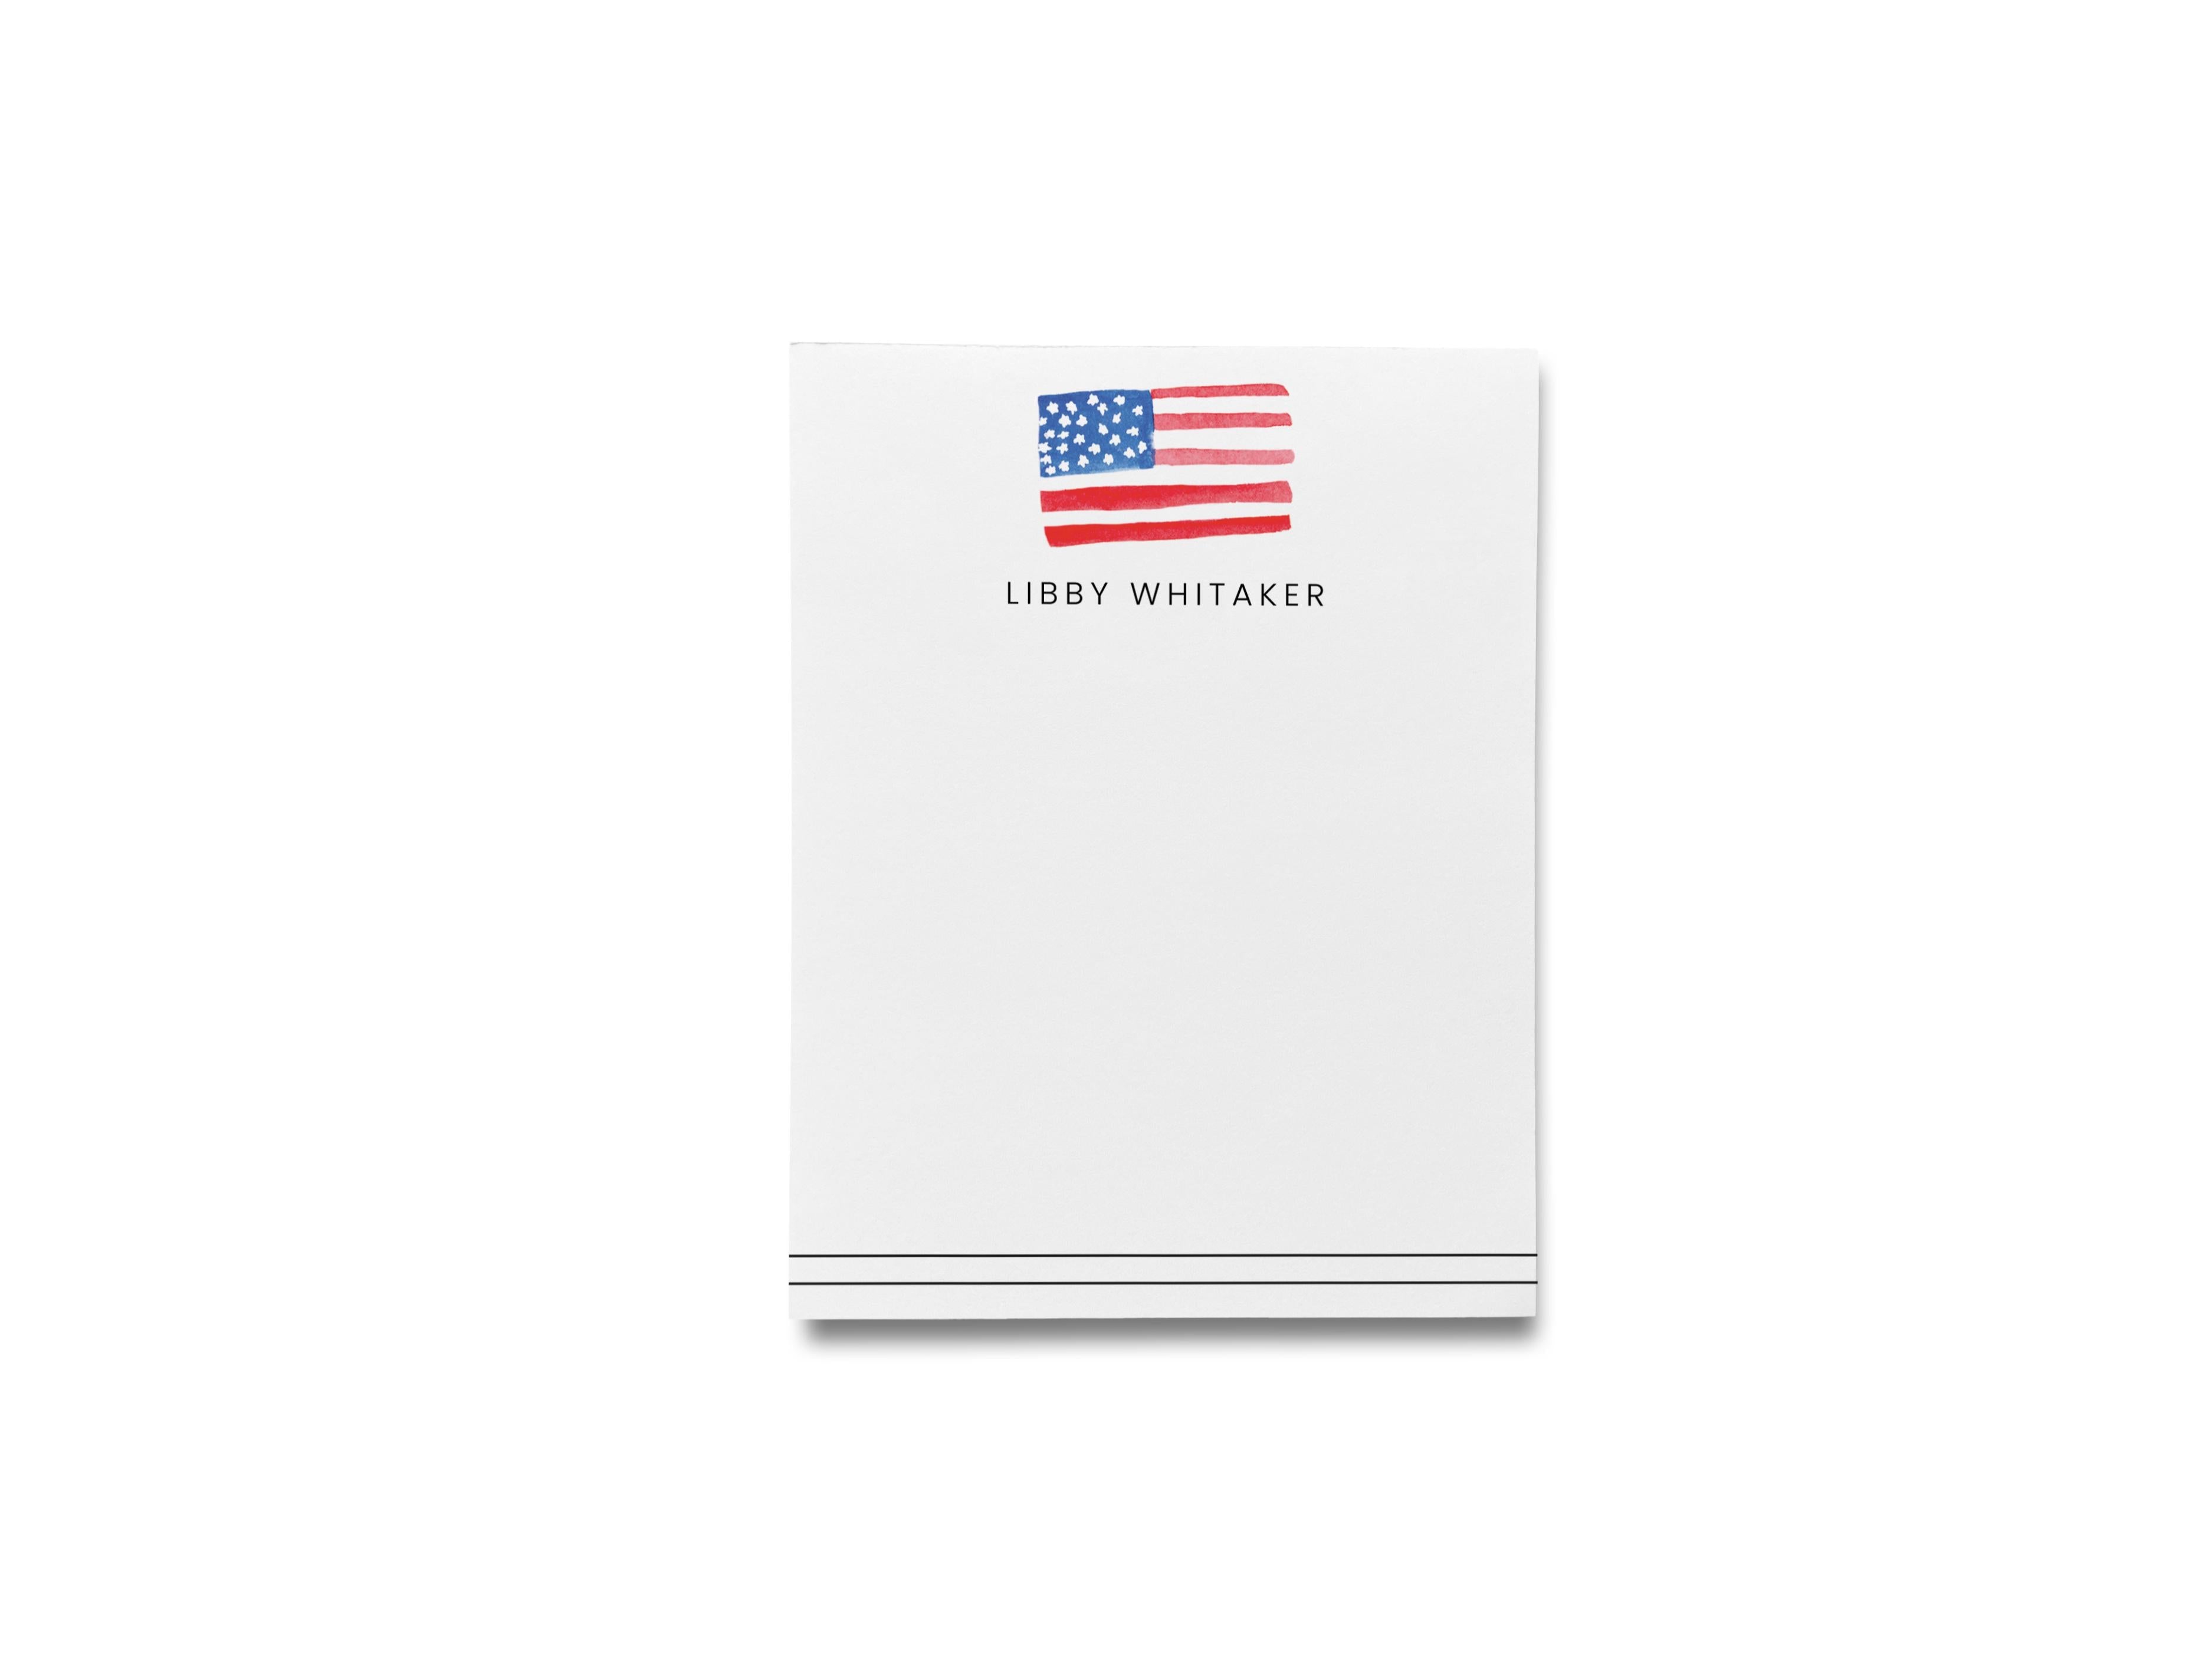 Personalized American Flag Notepad-These personalized notepads feature our hand-painted watercolor American flag, printed in the USA on a beautiful smooth stock. You choose which size you want (or bundled together for a beautiful gift set) and makes a great gift for the checklist and USA lover in your life.-The Singing Little Bird